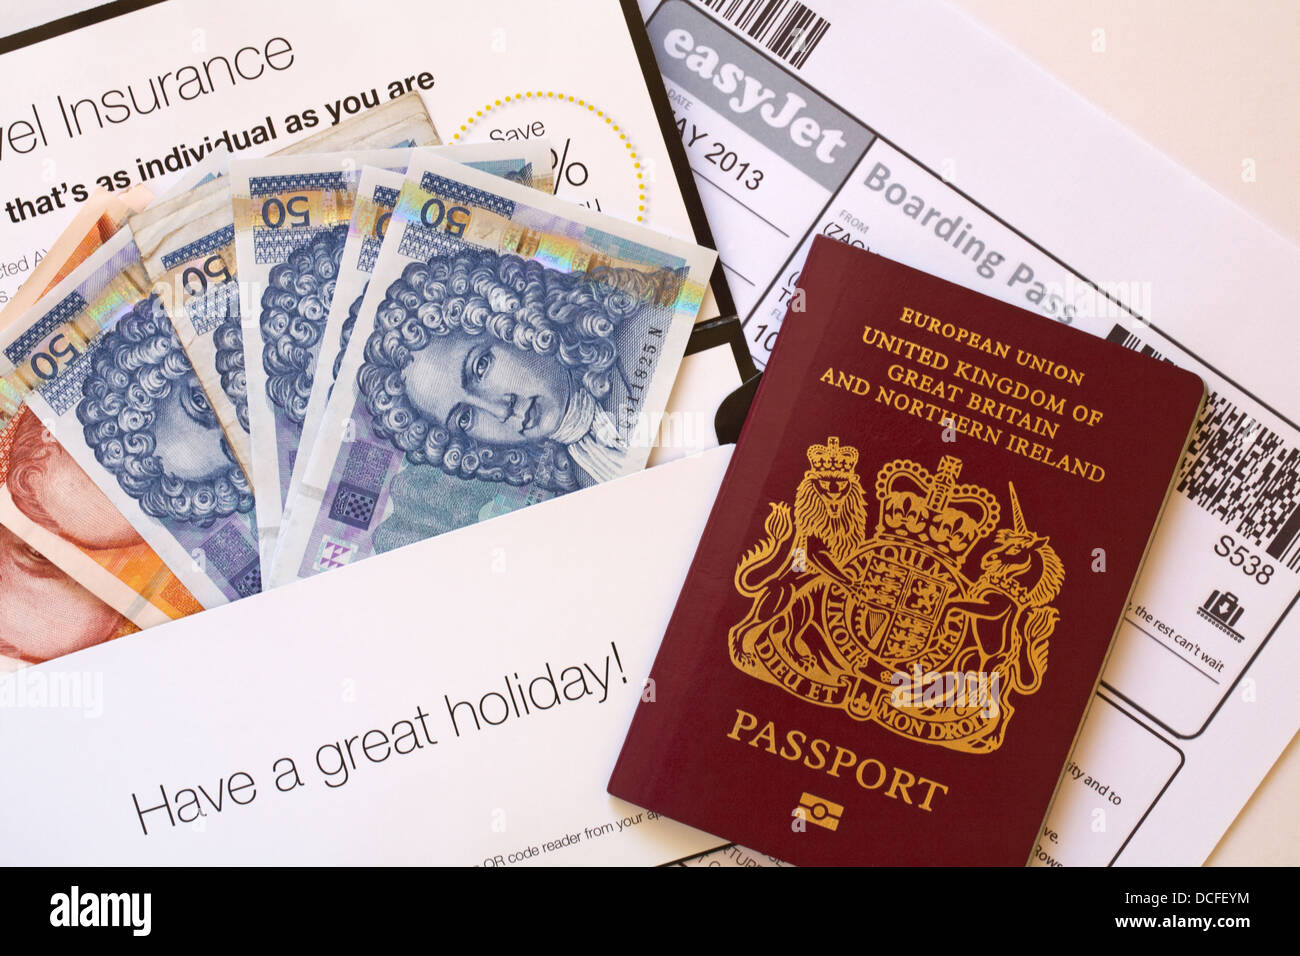 Have a great holiday - Easyjet boarding pass, passport and foreign currency for holiday in Croatia Stock Photo